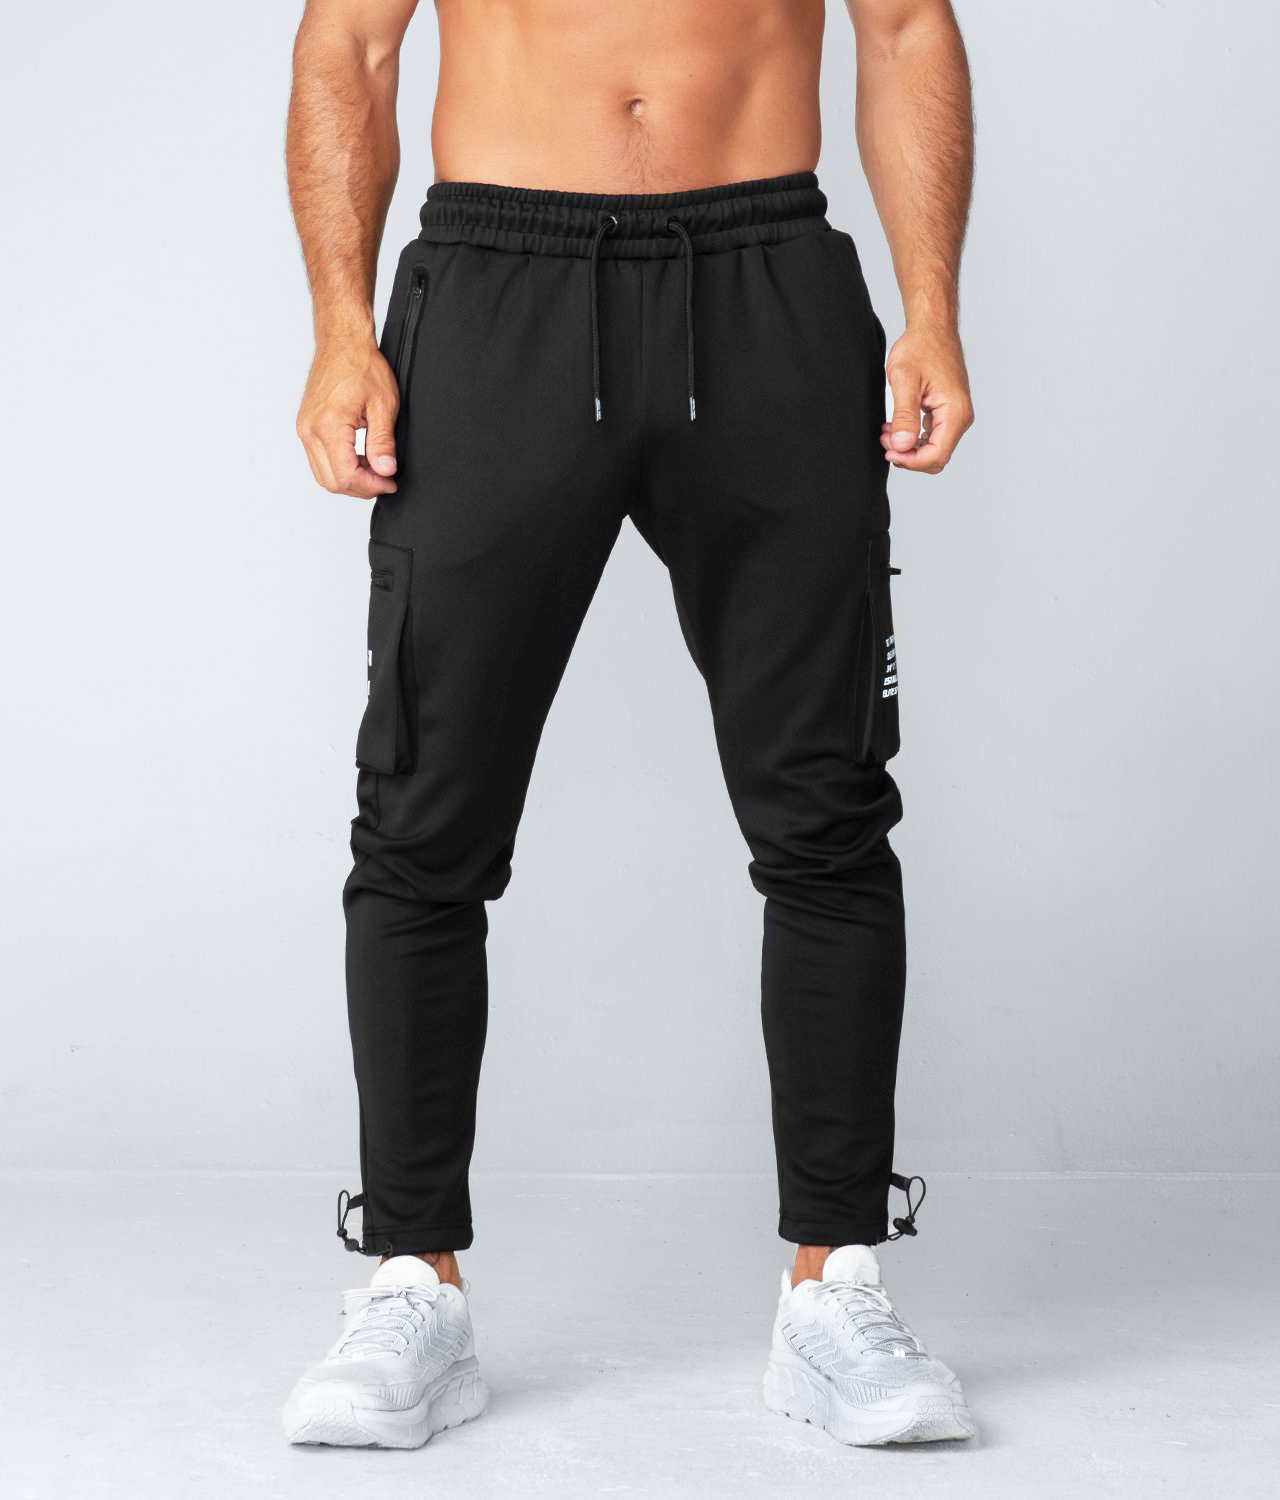 Shop Men's Black Cargo Sports Pants for Gym and Leisure – Gym Generation®